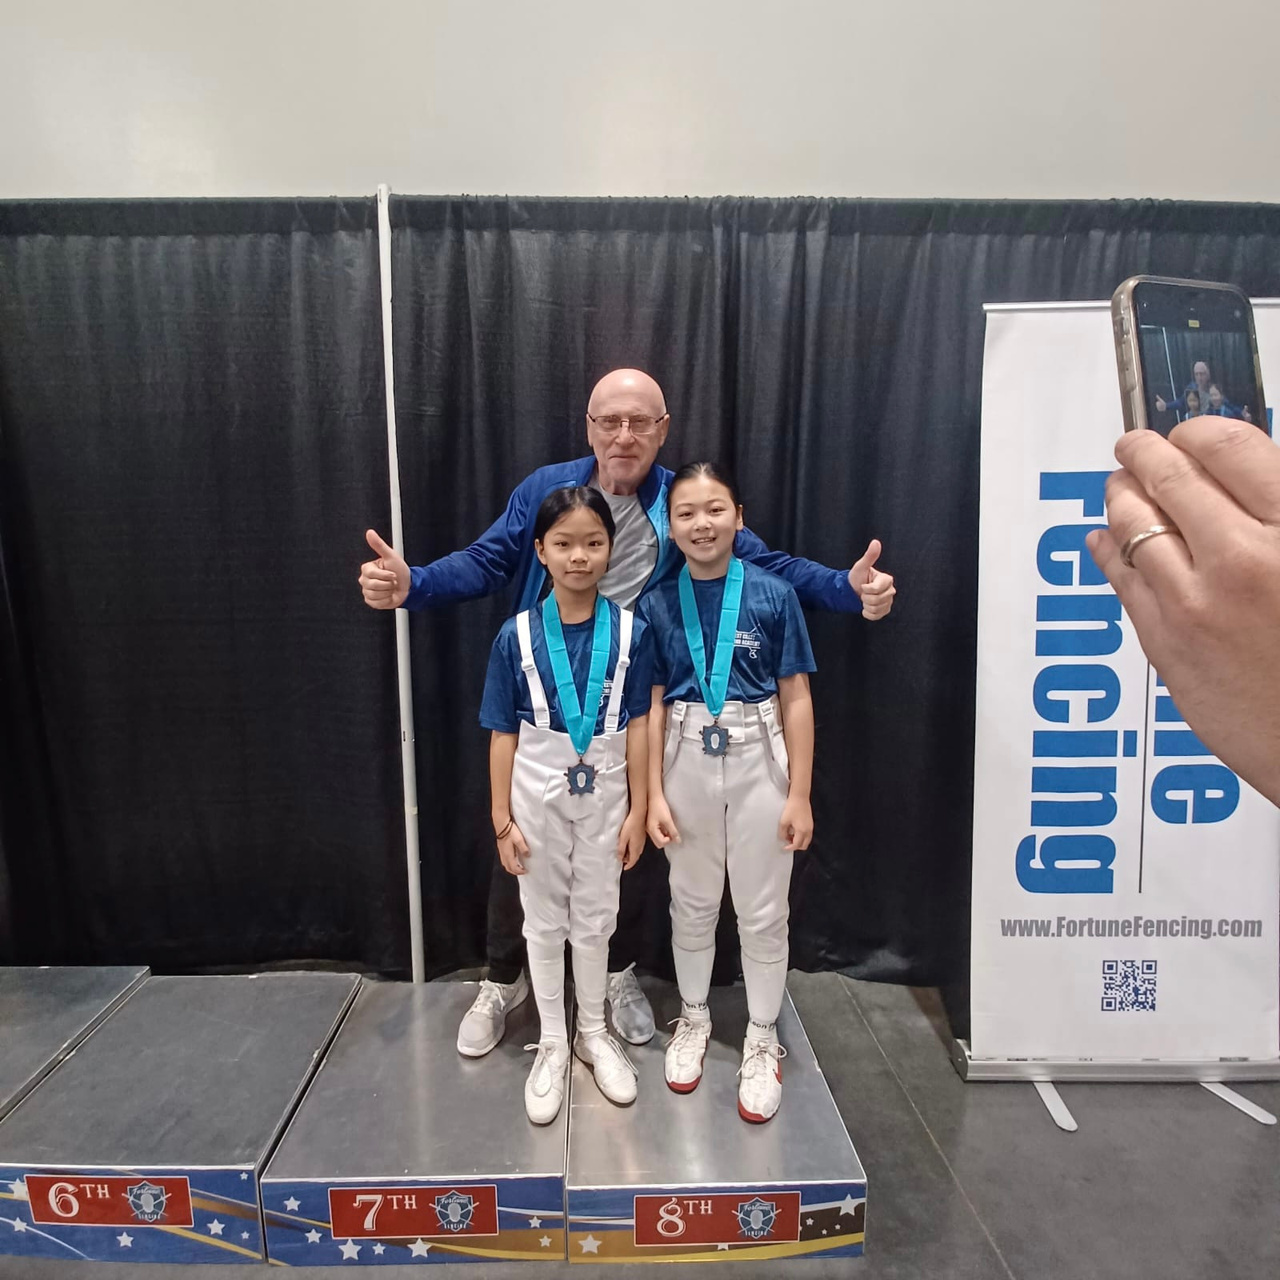 coach gherman stone behind two young girl fencers who won medals at their fencing tournament